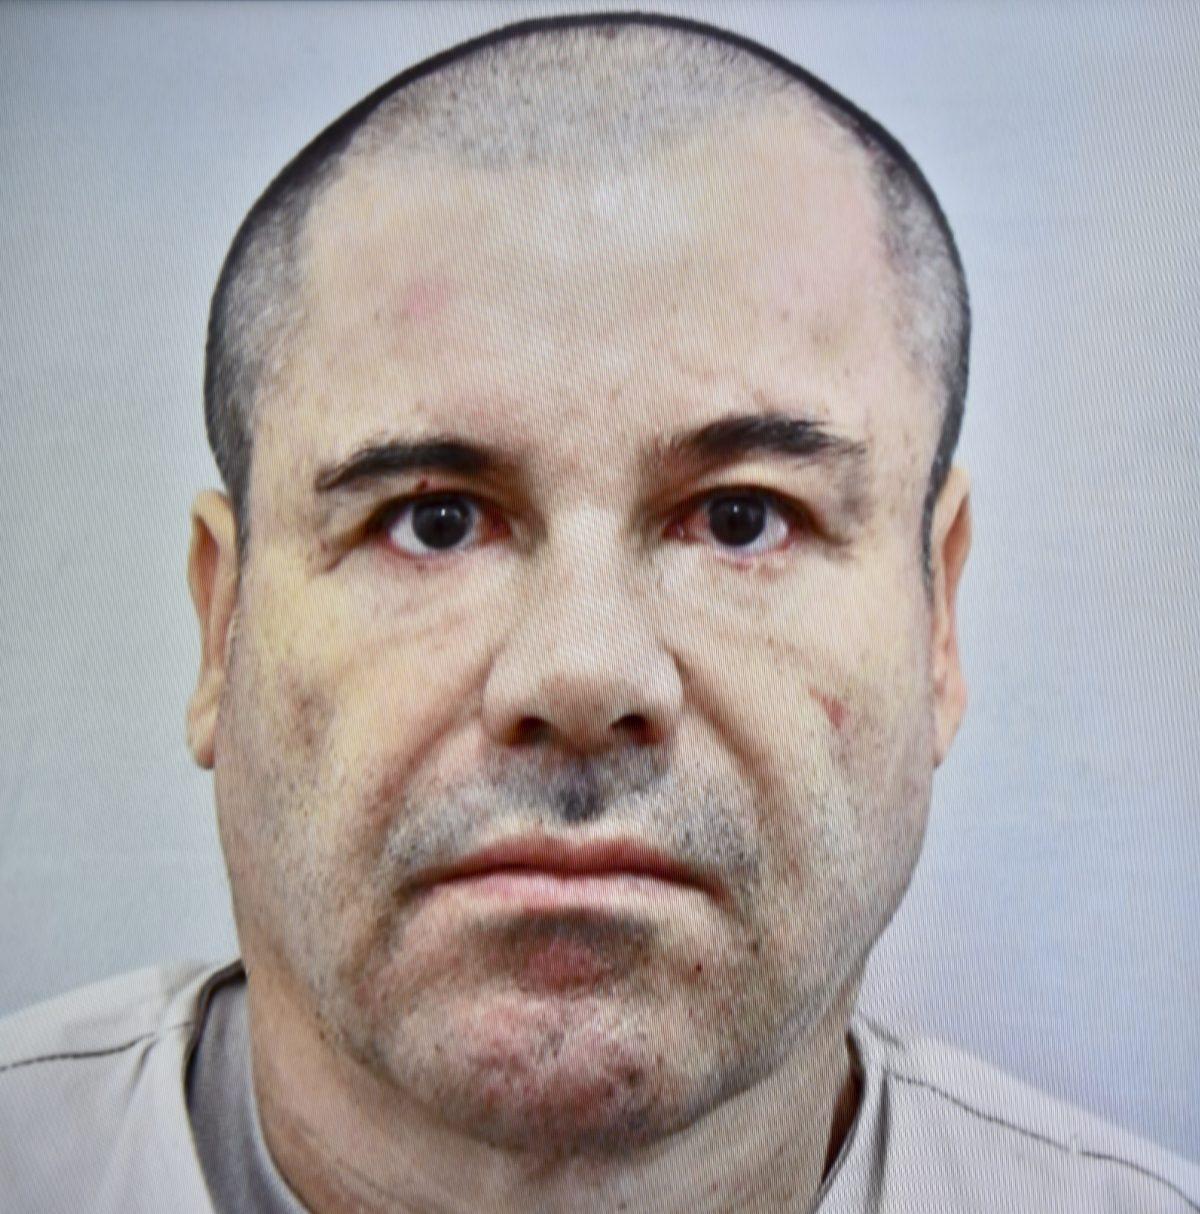 Picture taken from a TV screen of Mexican drug kingpin Joaquin “El Chapo” Guzman displayed during a press conference held at the Secretaria de Gobernacion in Mexico City, on July 13, 2015. (YURI CORTEZ/AFP/Getty Images)